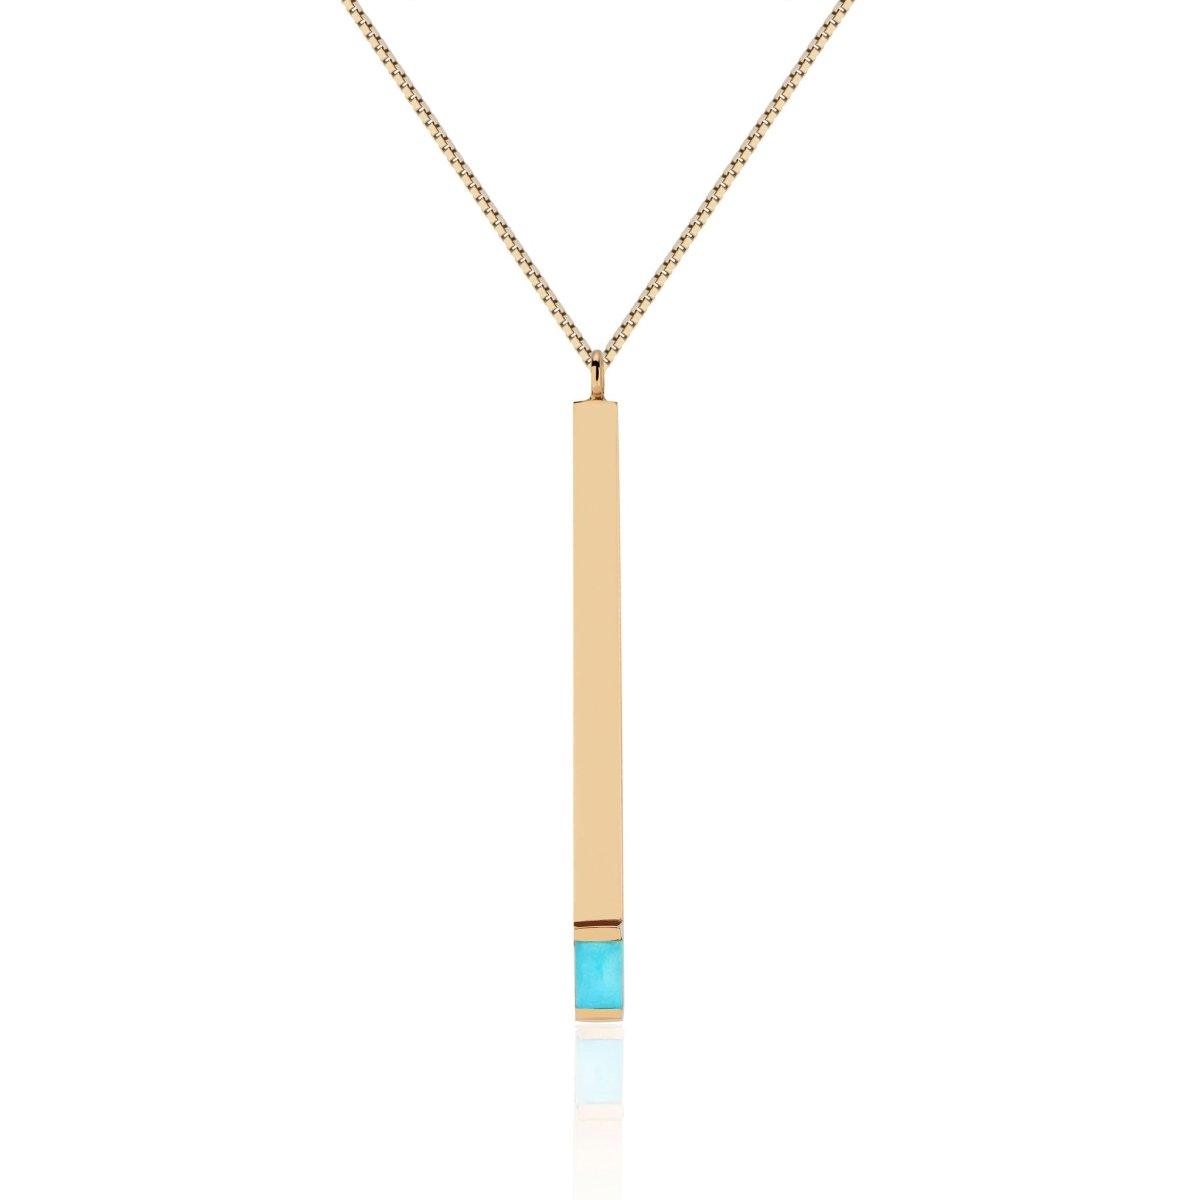 In A Blue Fire Pendant - Nataly Aponte